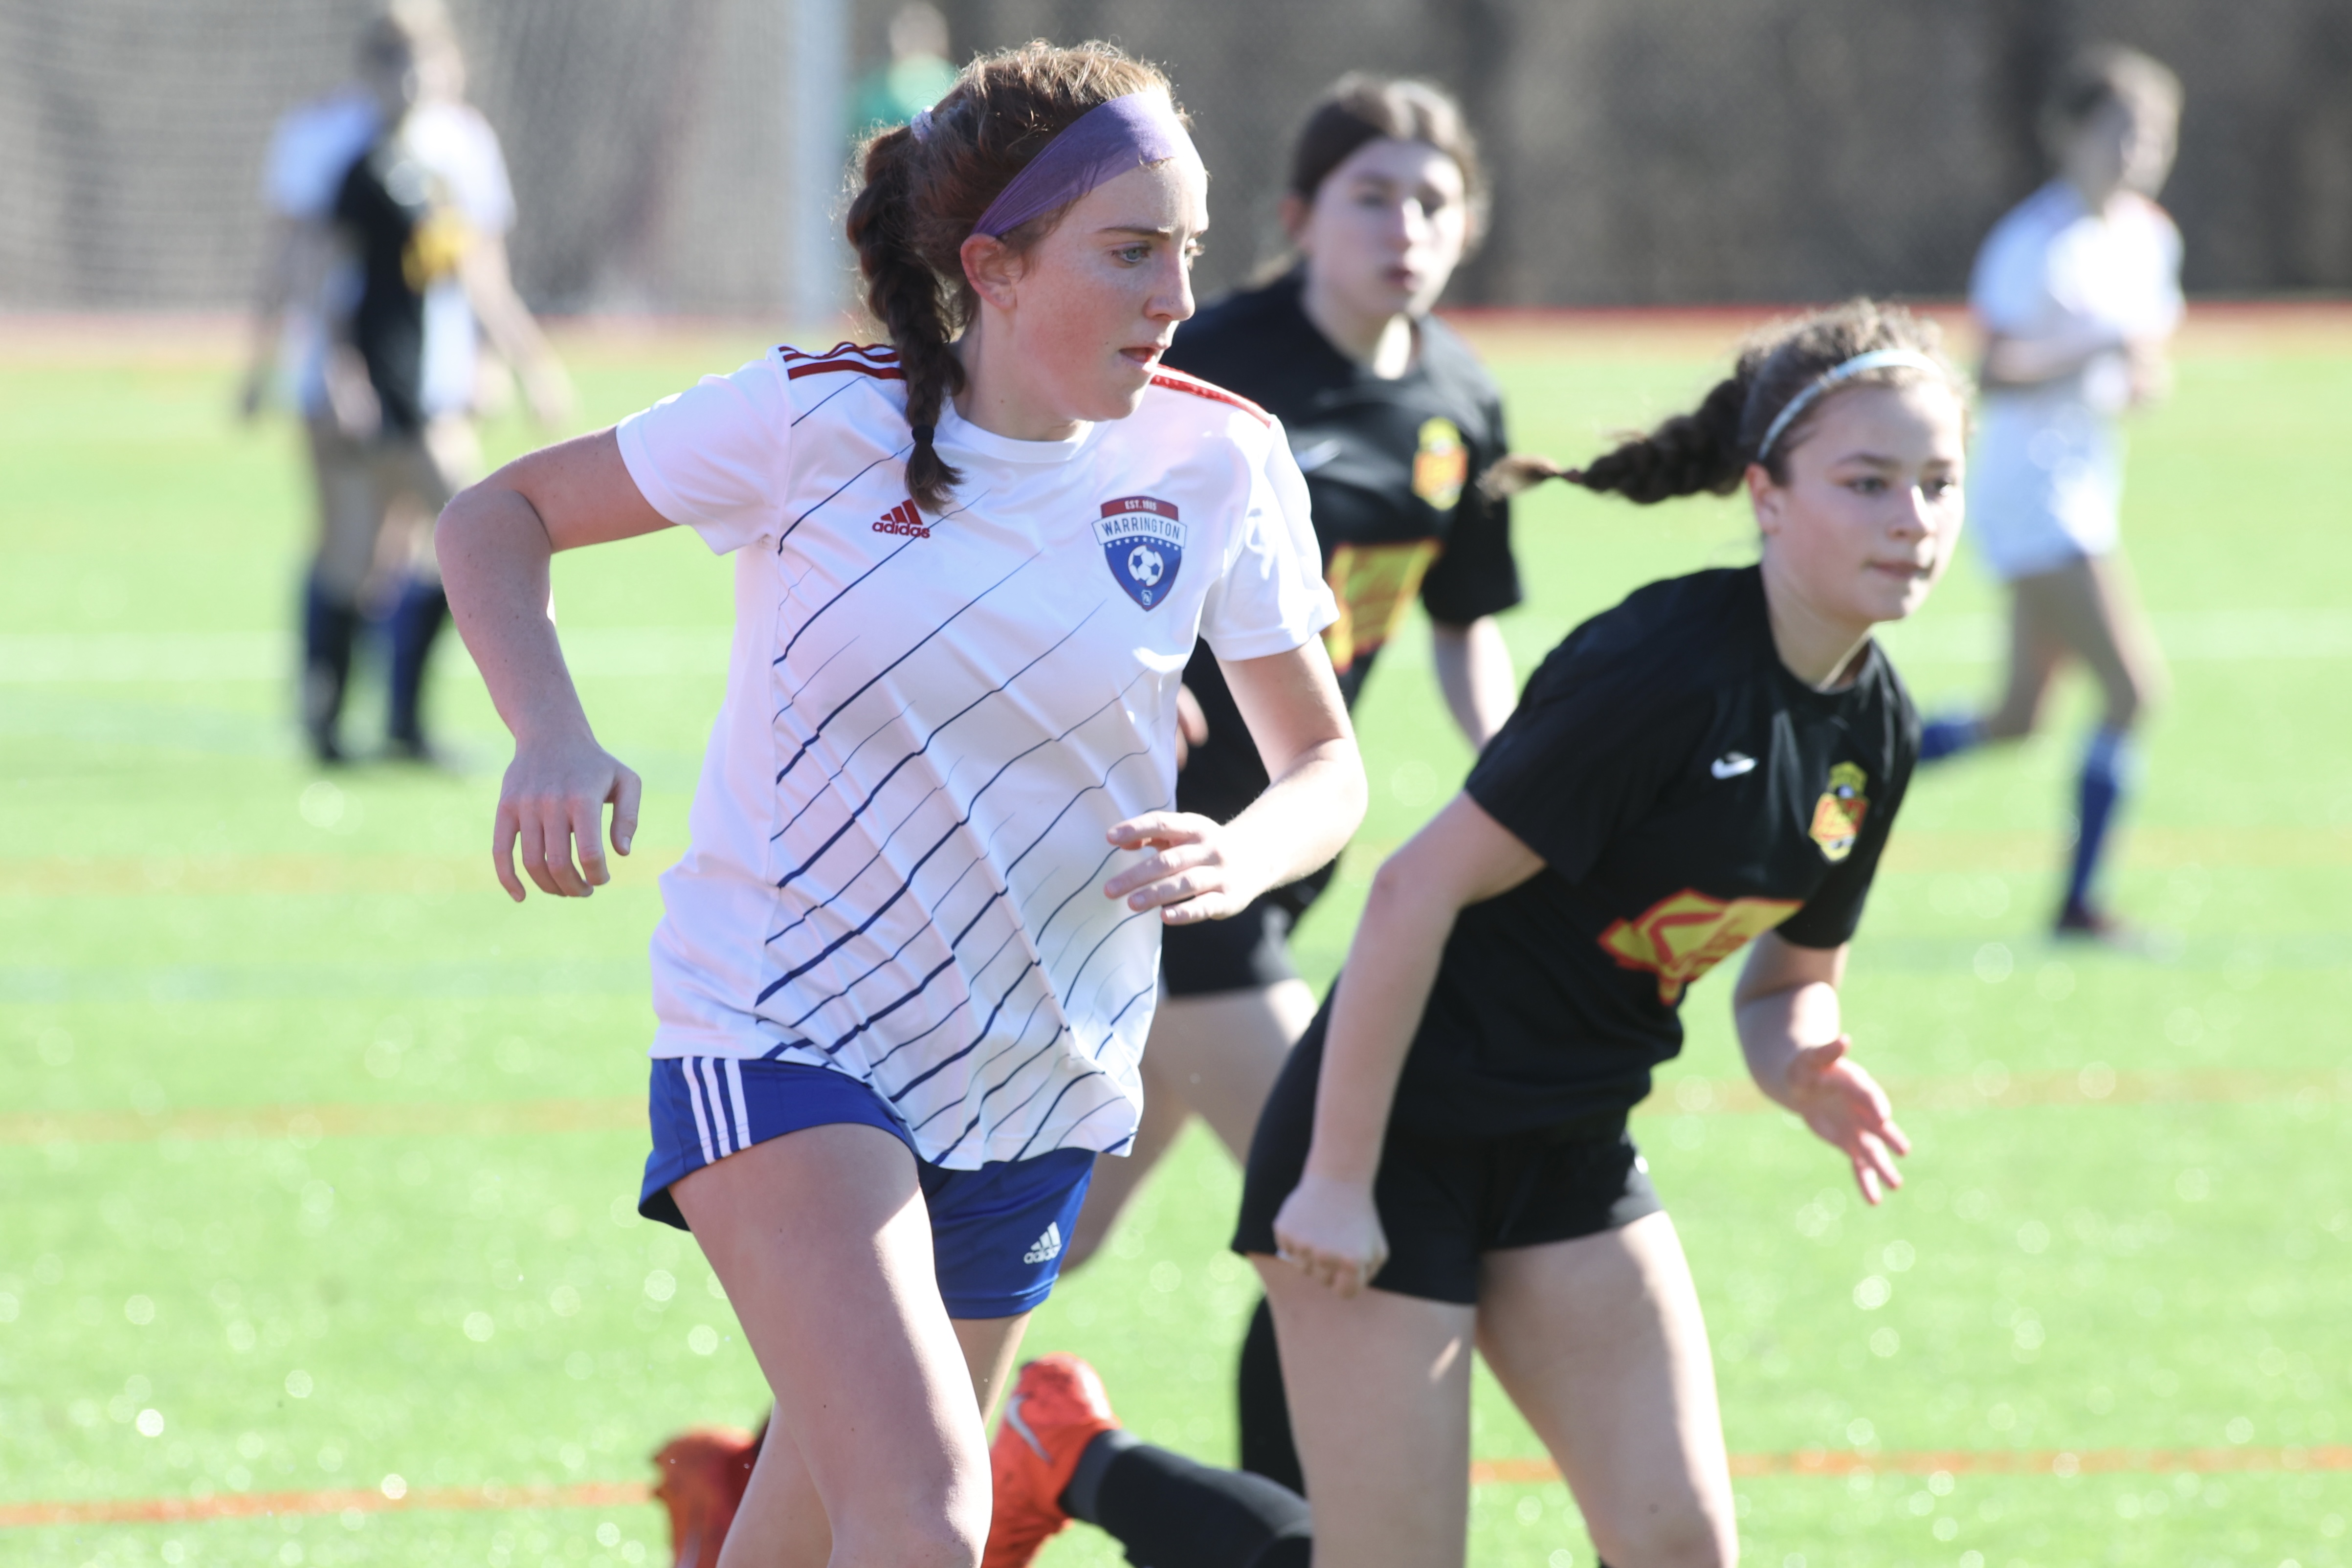 <span class="pn-tooltip pn-player-link">
        <span class="name-pointer">Standouts at FC Europa Turf Cup Showcase – Girls</span>
        <span class="info-box not-prose" style="background: linear-gradient(to bottom, rgba(212,175,55, 0.95) 0%,rgba(212,175,55, 1) 100%)">
            <a href="https://prepsoccer.com/2024/03/standouts-at-fc-europa-turf-cup-showcase-girls/" class="link-wrap">
                                    <span class="player-img"><img src="https://prepsoccer.com/wp-content/uploads/sites/8/2024/03/36E5C6D7-89A7-4EBE-A44F-3133334820516N4A5113-2024-03-03T20_47_50.229-2.jpg?w=150&h=150&crop=1" alt="Standouts at FC Europa Turf Cup Showcase – Girls"></span>
                
                <span class="player-details">
                    <span class="first-name">Standouts</span>
                    <span class="last-name">at FC Europa Turf Cup Showcase – Girls</span>
                    <span class="measurables">
                                            </span>
                                    </span>
                <span class="player-rank">
                                                        </span>
                                    <span class="state-abbr"></span>
                            </a>

            
        </span>
    </span>
